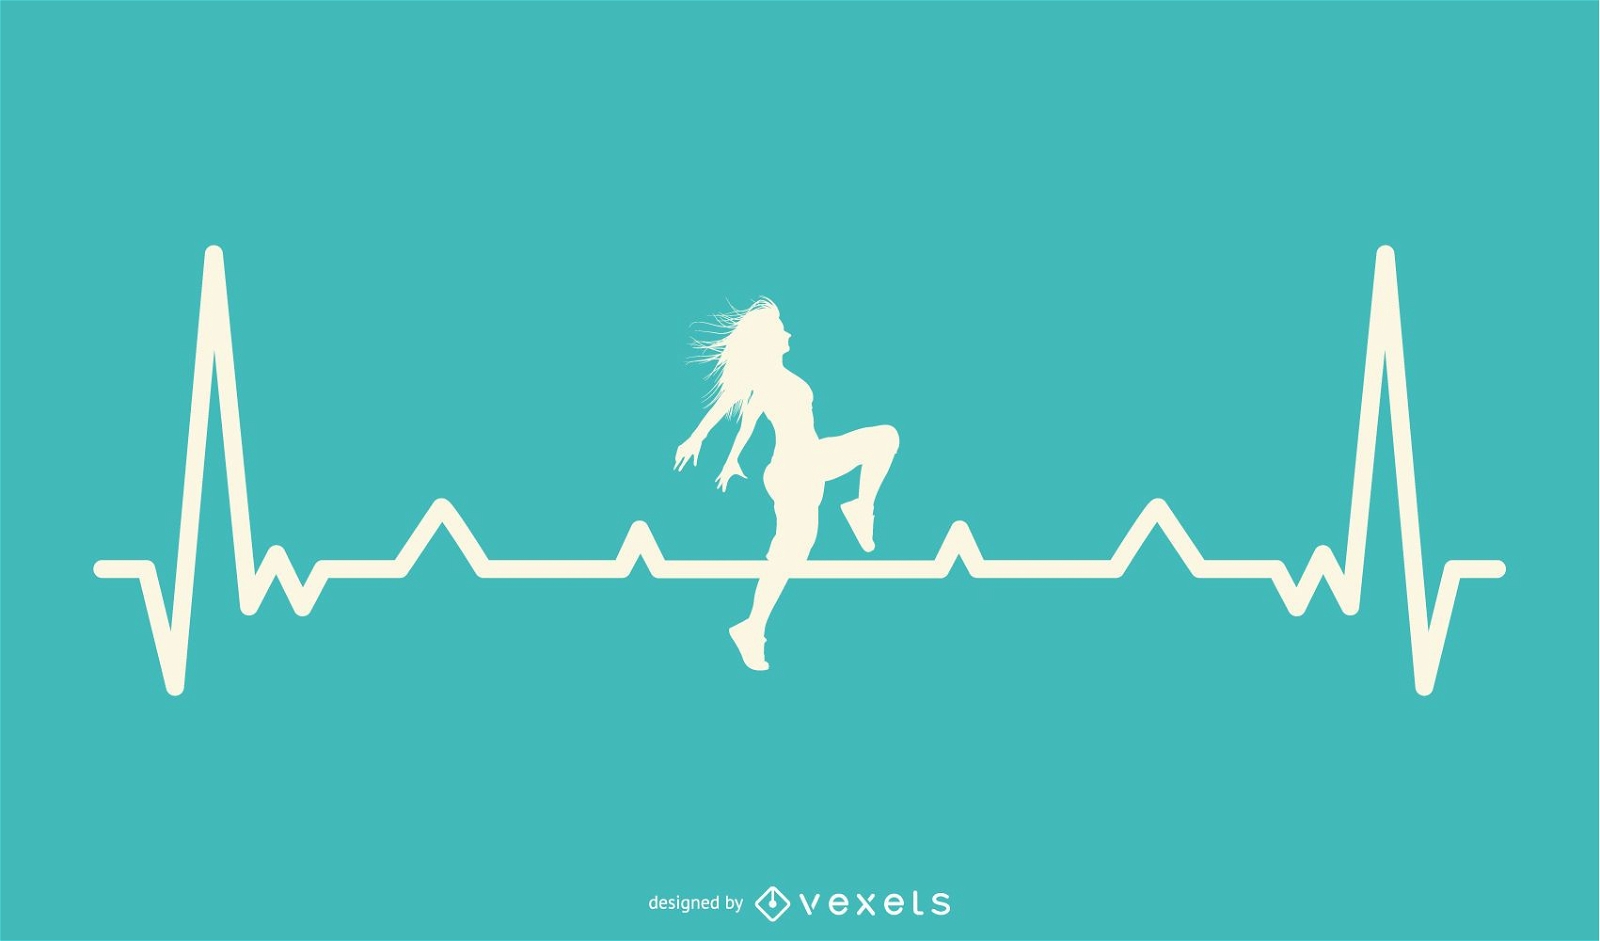 Dancer with Heartbeat Line Design 